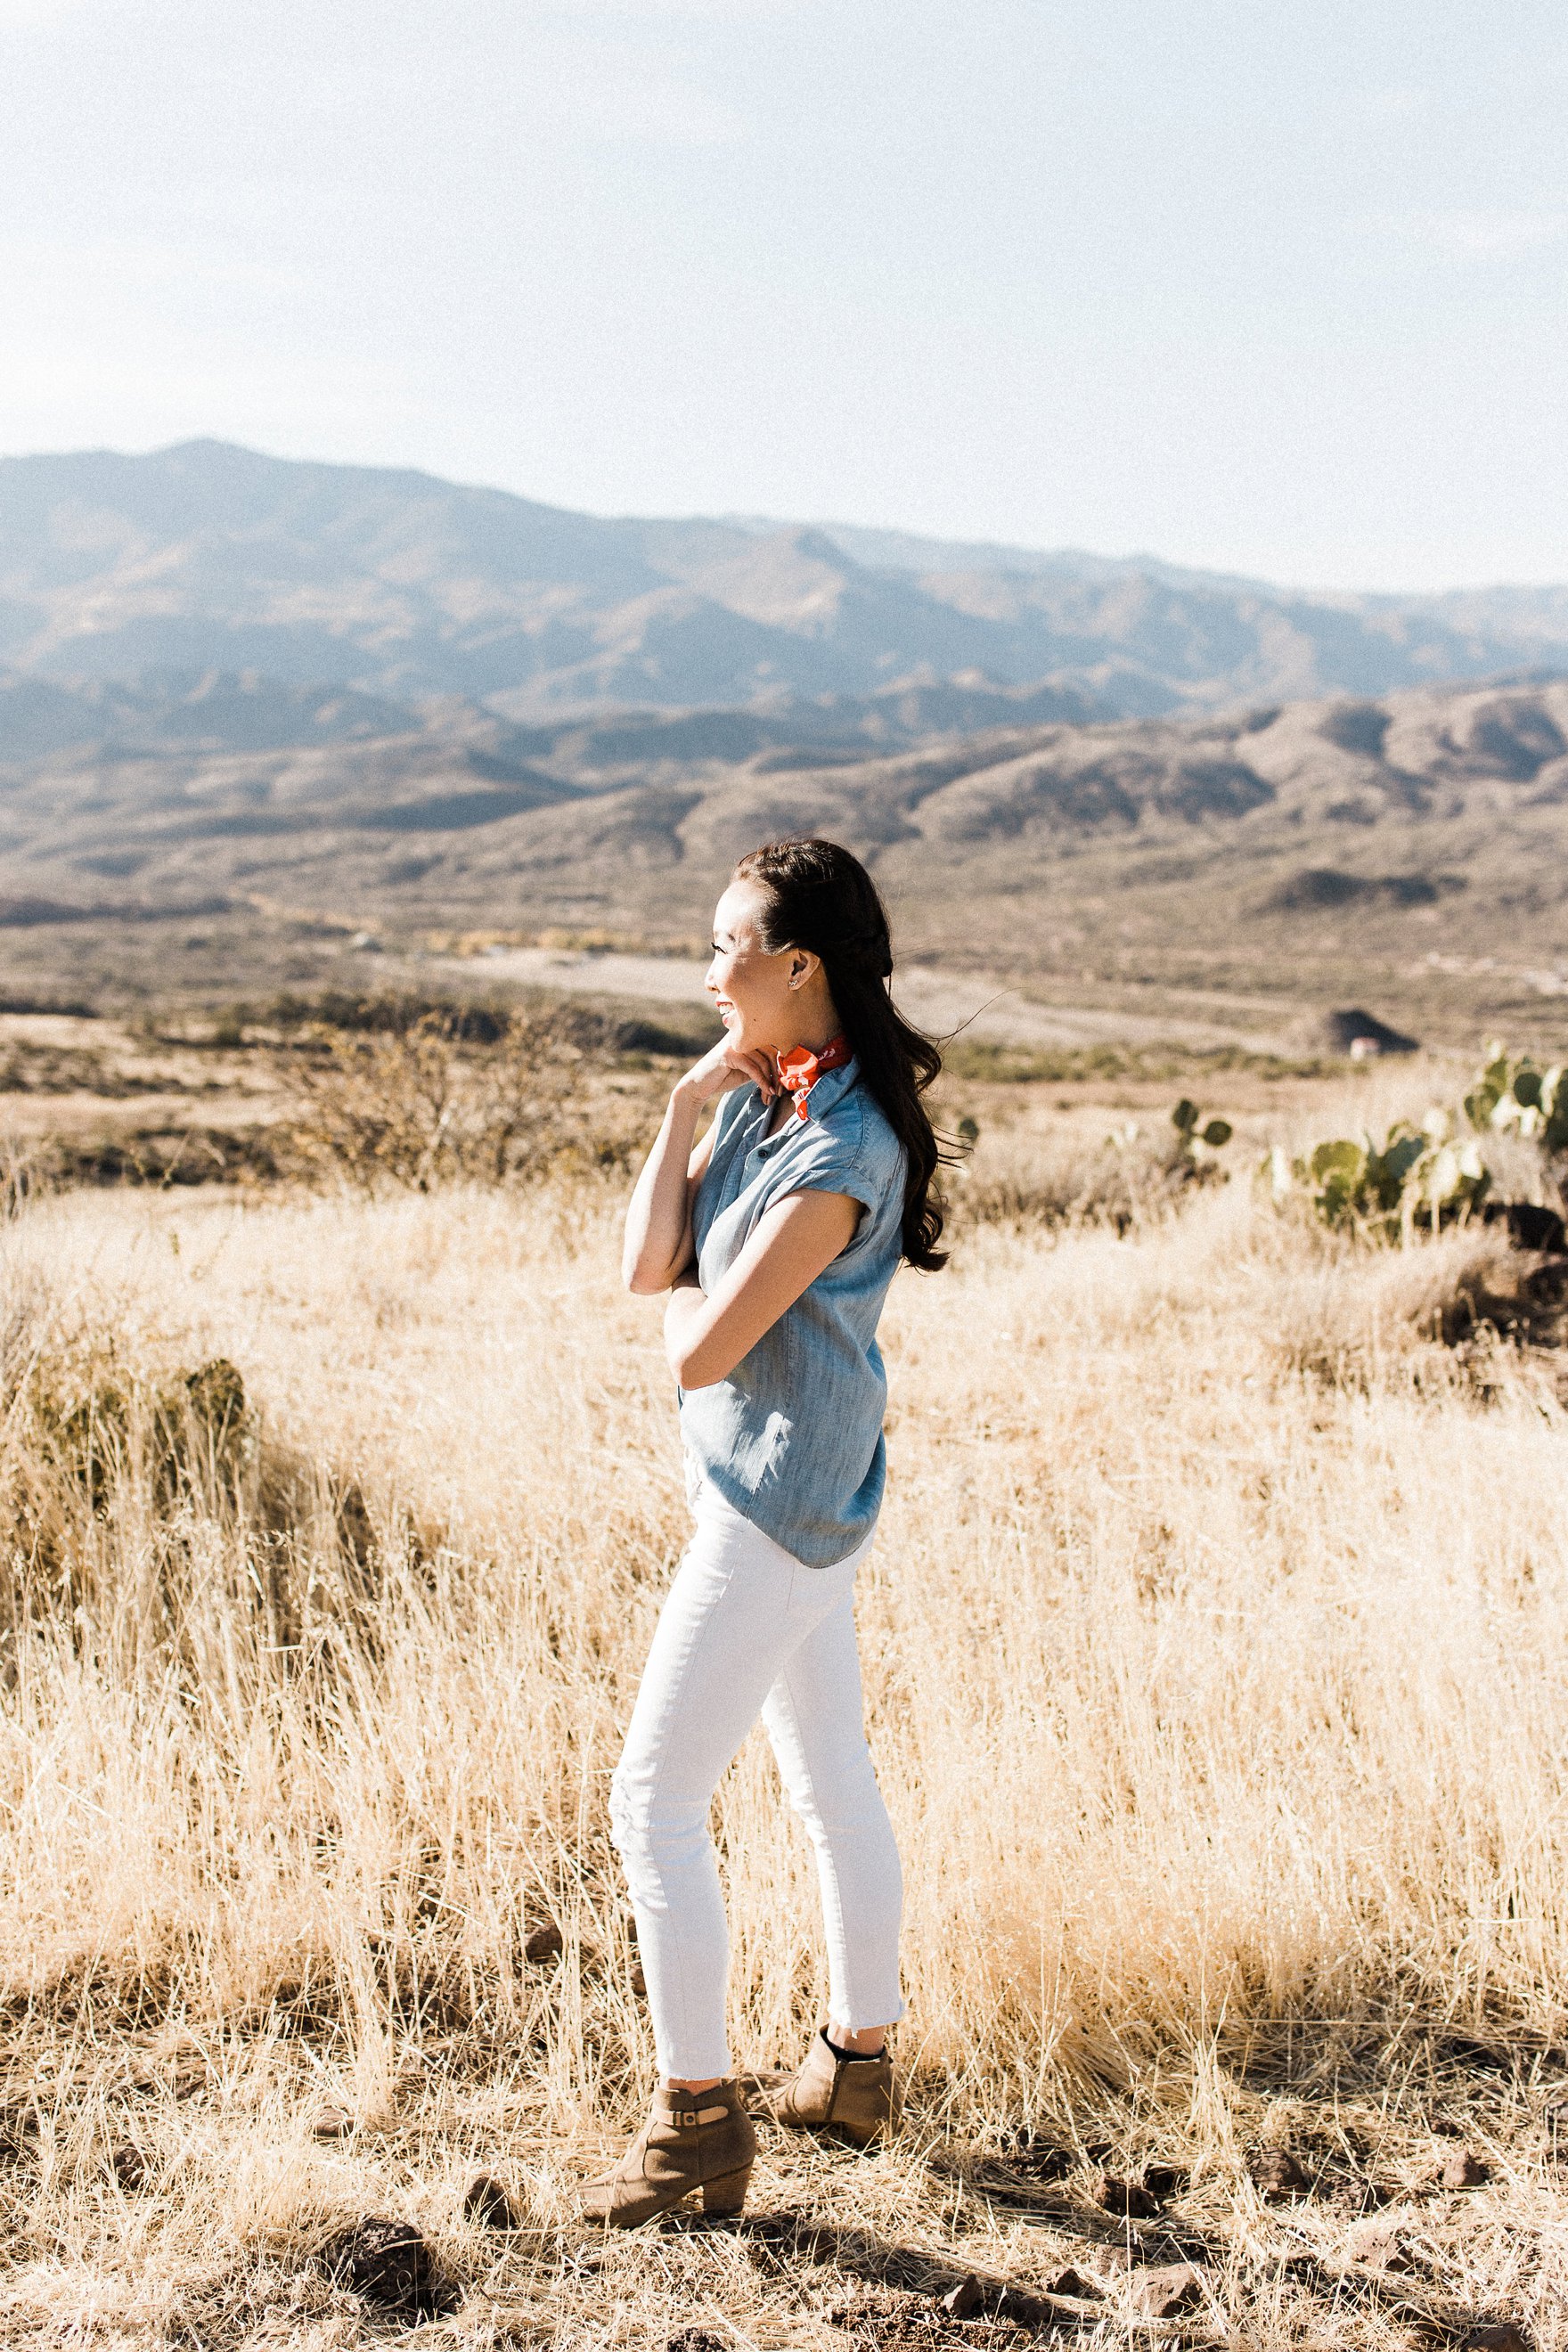 chambray short sleeved shirt white jeans with booties in tall dry grass in the arizona phoenix desert wearing red scarf around neck